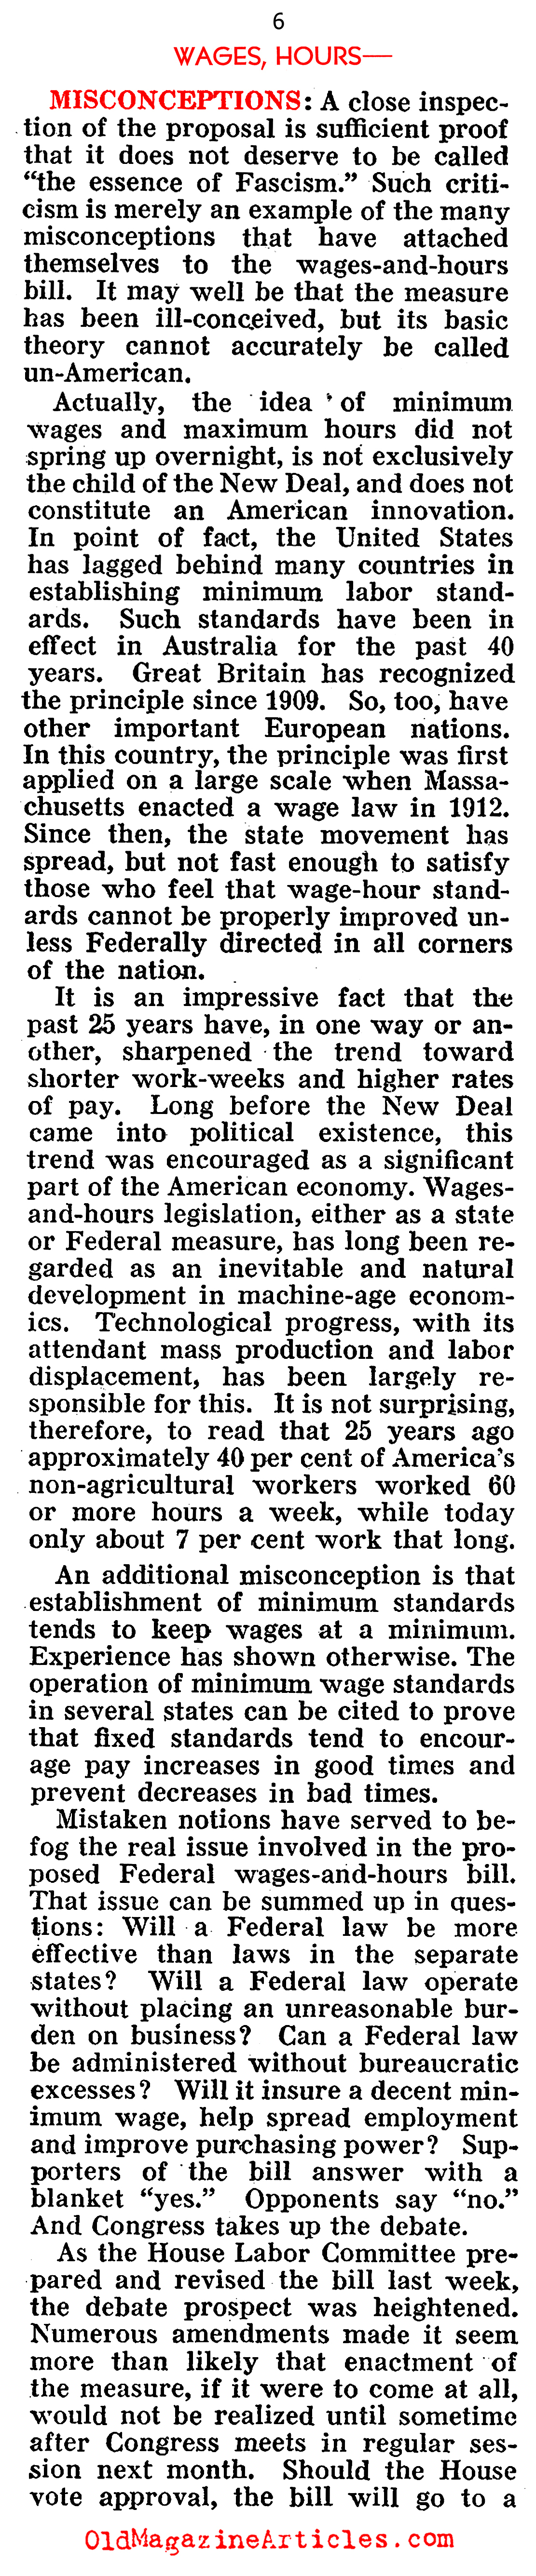 The Wages and Hours Bill (Pathfinder Magazine, 1937, 1938)